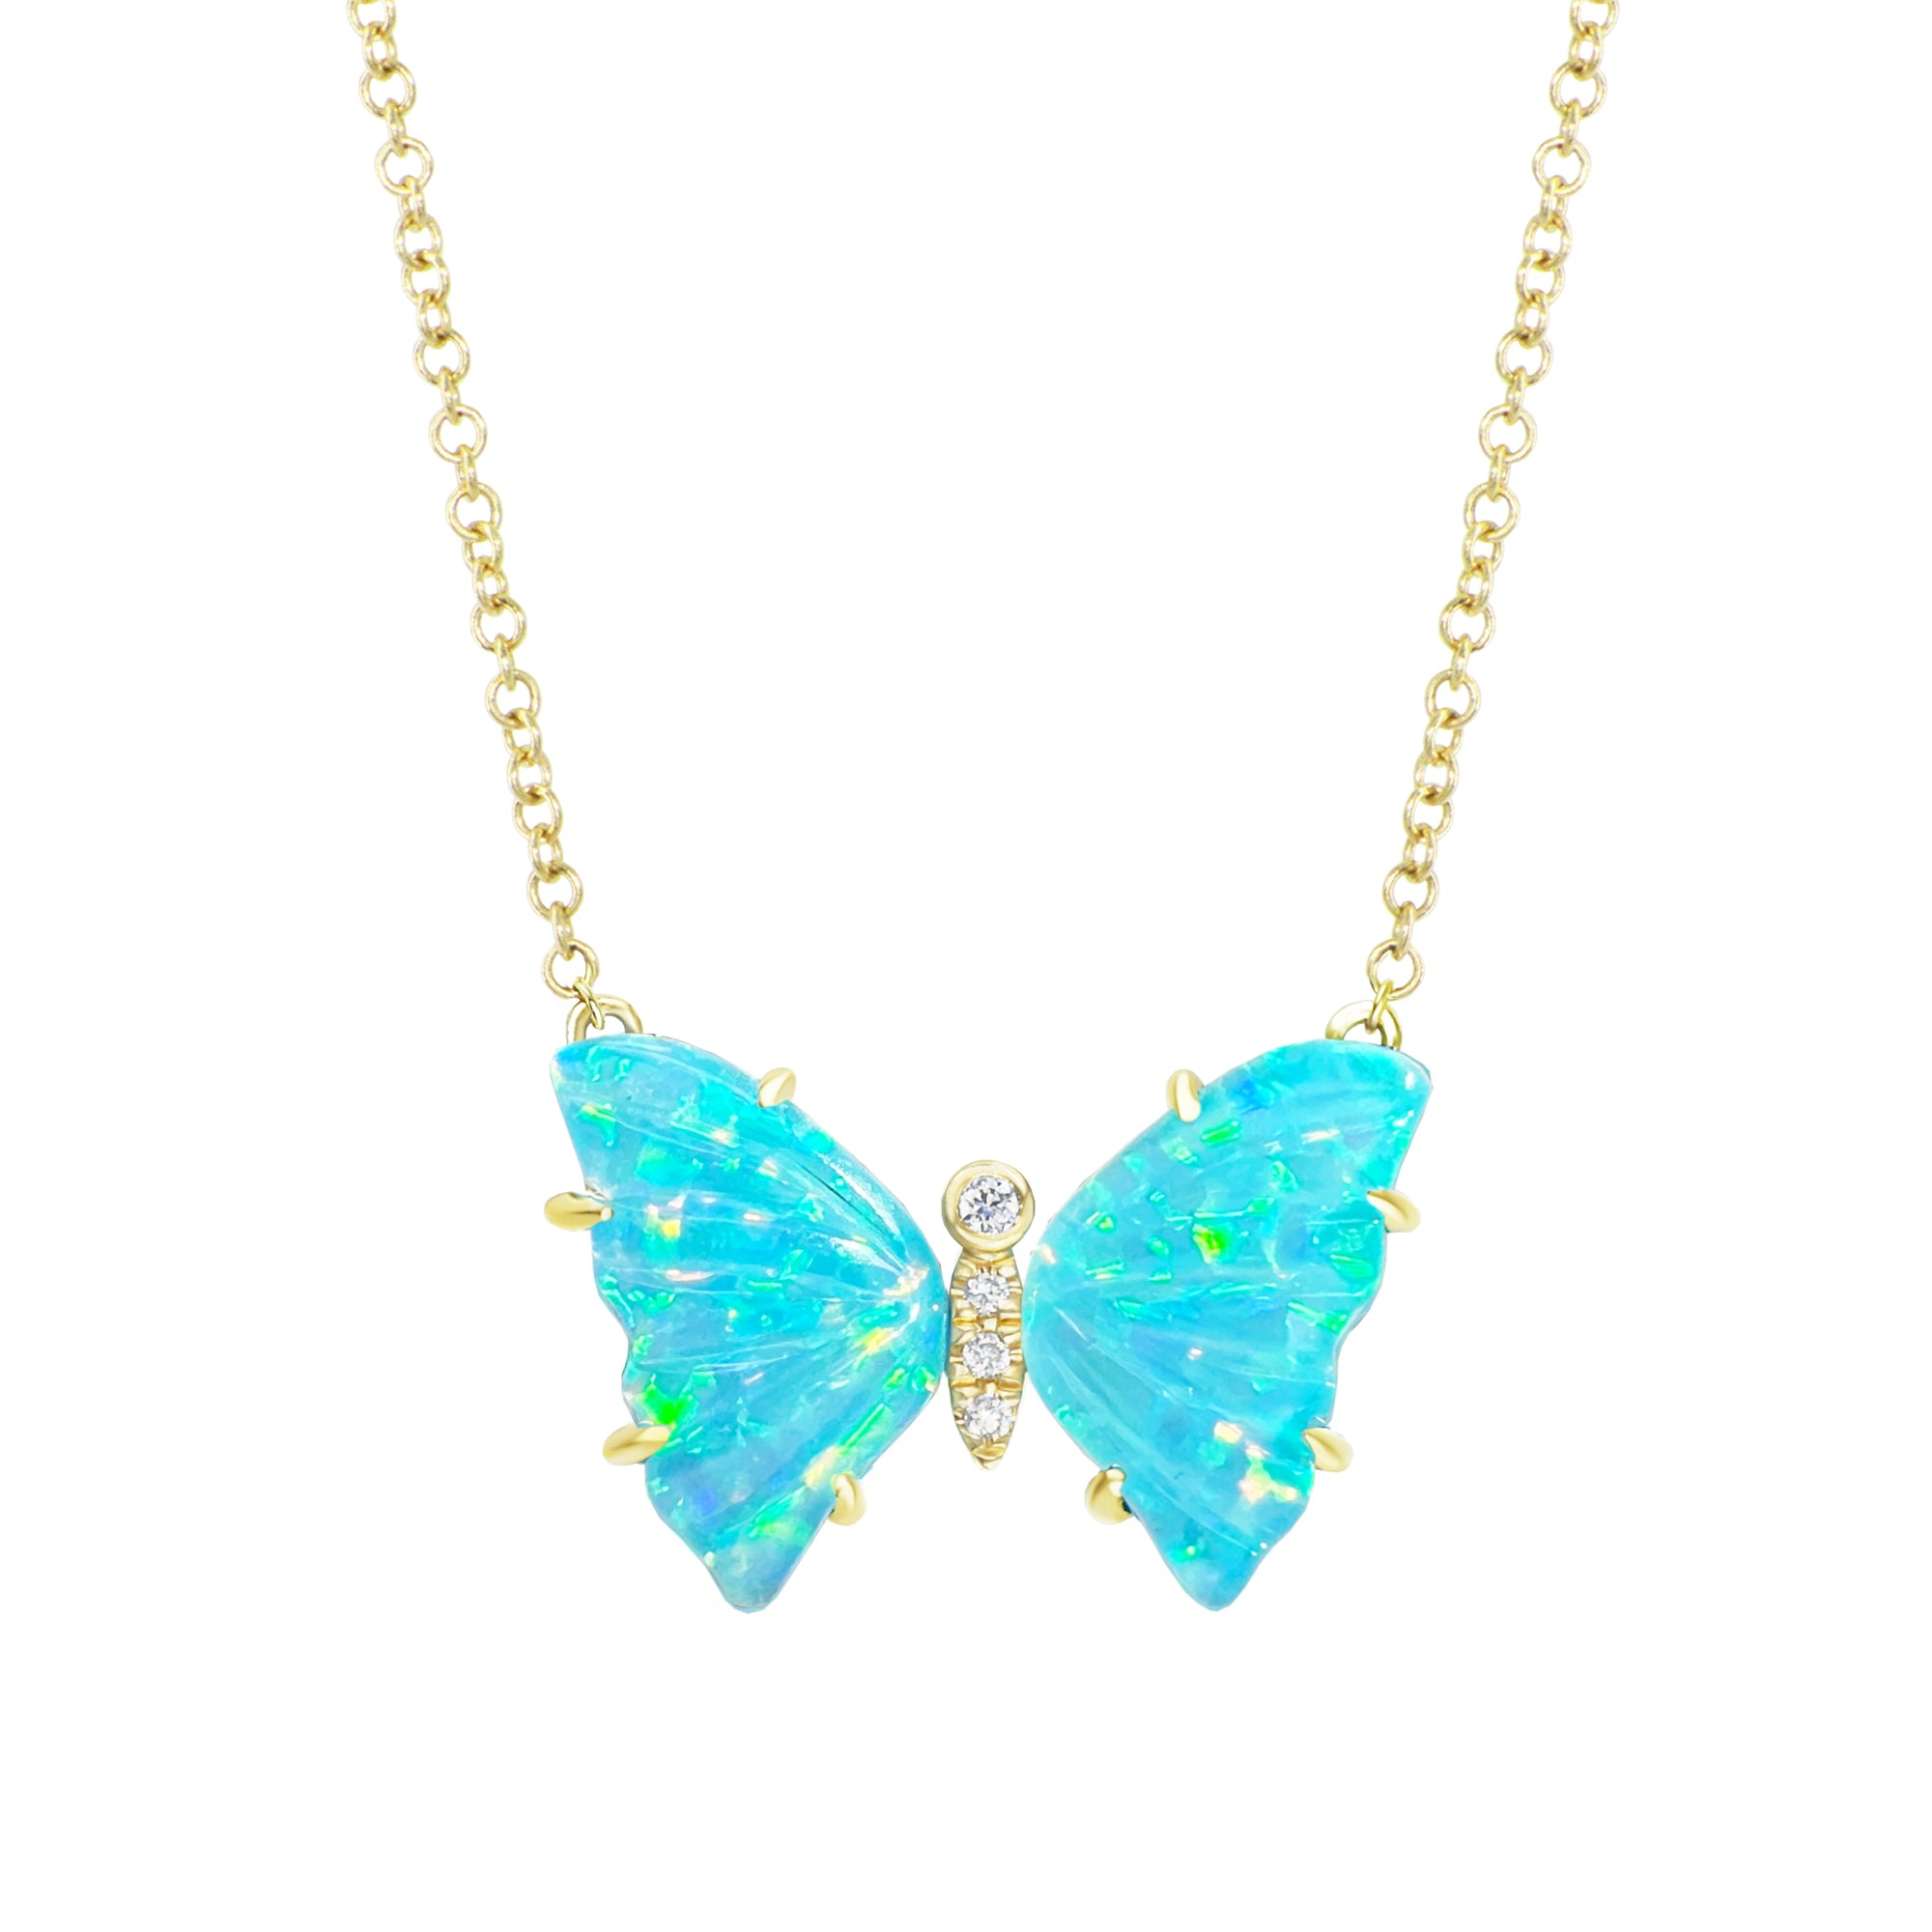 Women’s Blue Mini Butterfly Necklace With Diamonds & Prongs In Turquoise Opal Kamaria